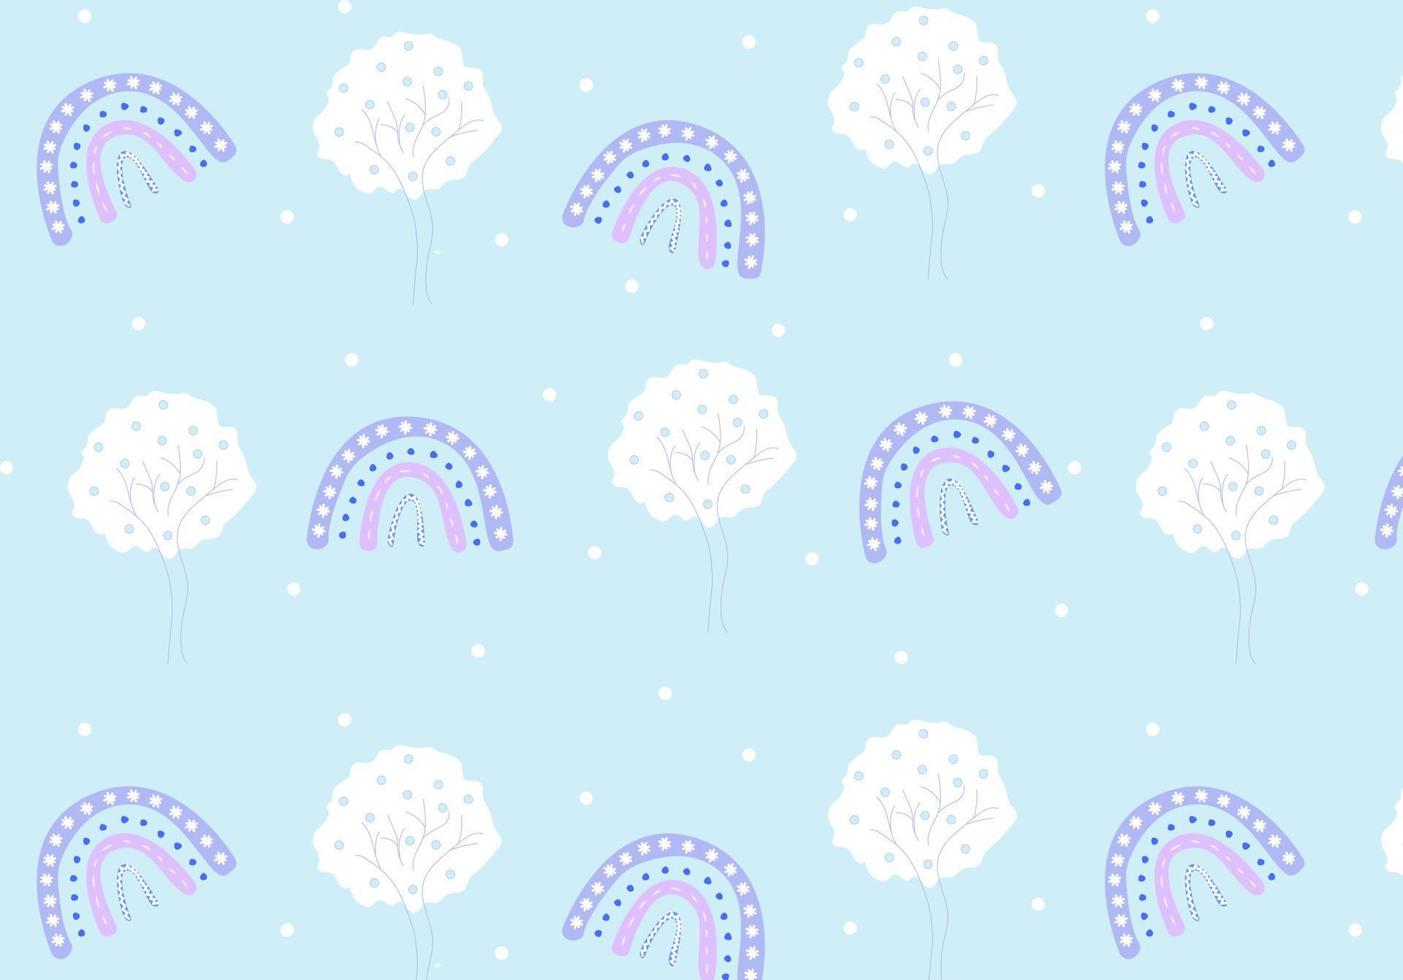 Seamless pattern with trees and rainbows. Hand Drawn. Great for wall art design, wrapping, fabric, textile, pillow or blanket prints, etc.Vector illustration vector